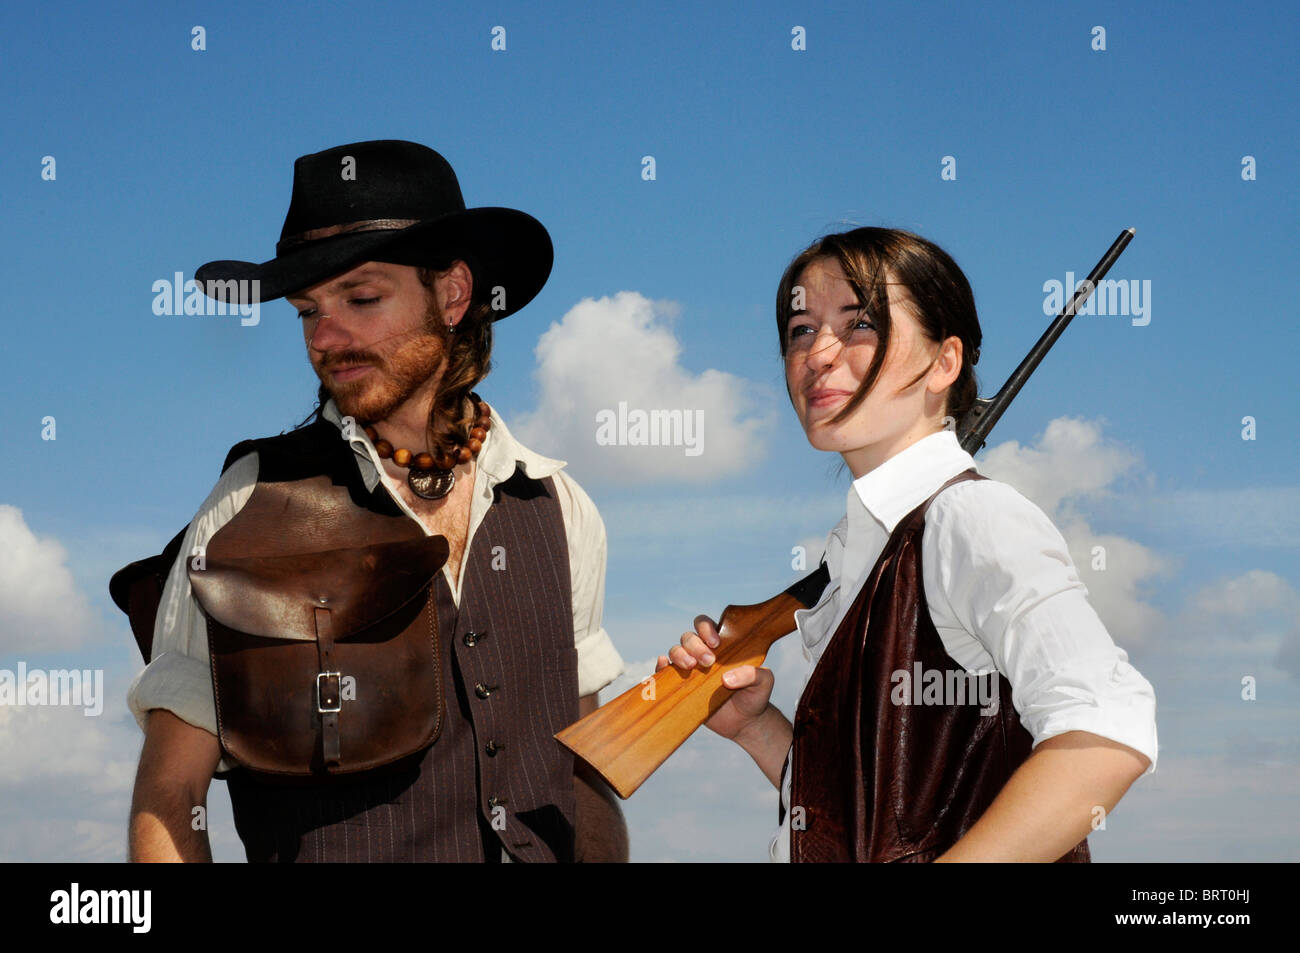 Cowboy and cowgirl Stock Photo